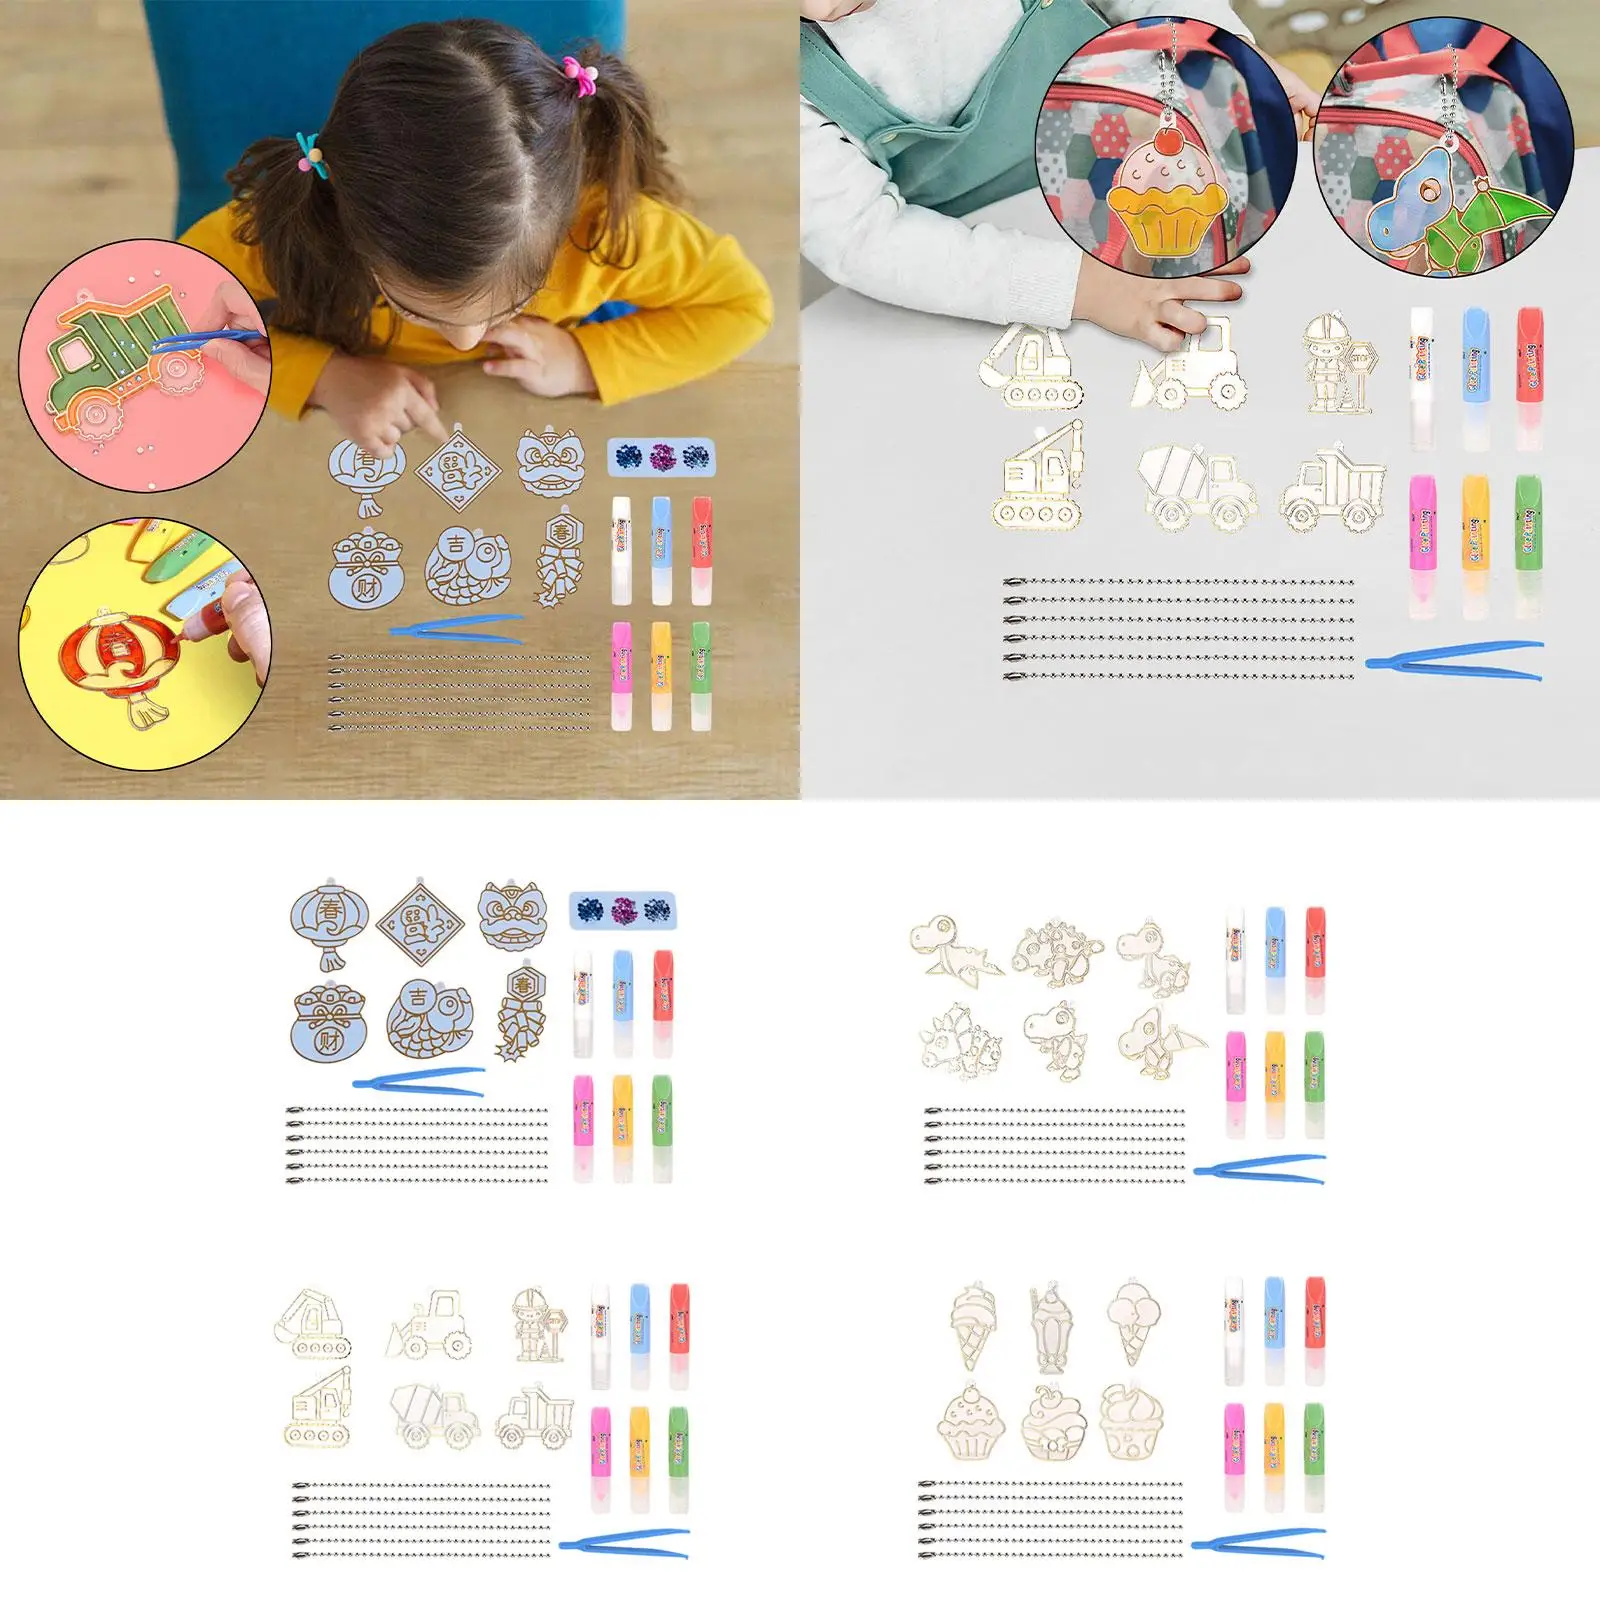 DIY Crystal Paint Arts and Crafts Set Decorate DIY Crystal Painting Kits for Boys Girls Children Adults Birthday Gifts New Year